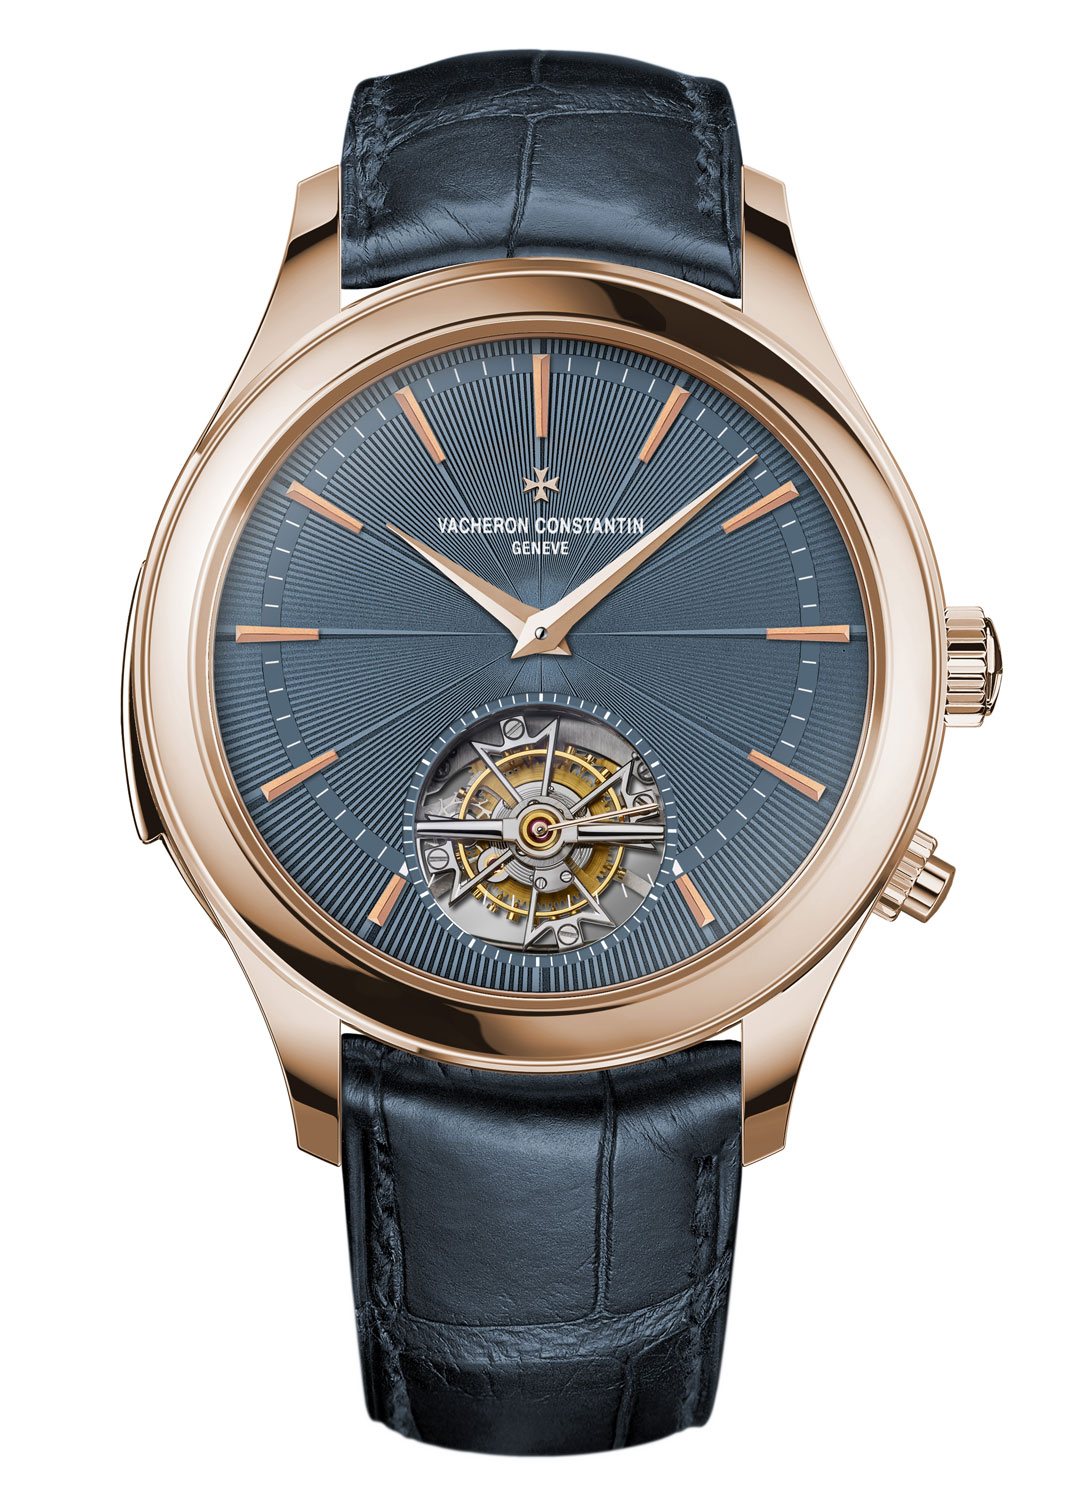 Les Cabinotiers Minute repeater tourbillon sky chart - A celestial note